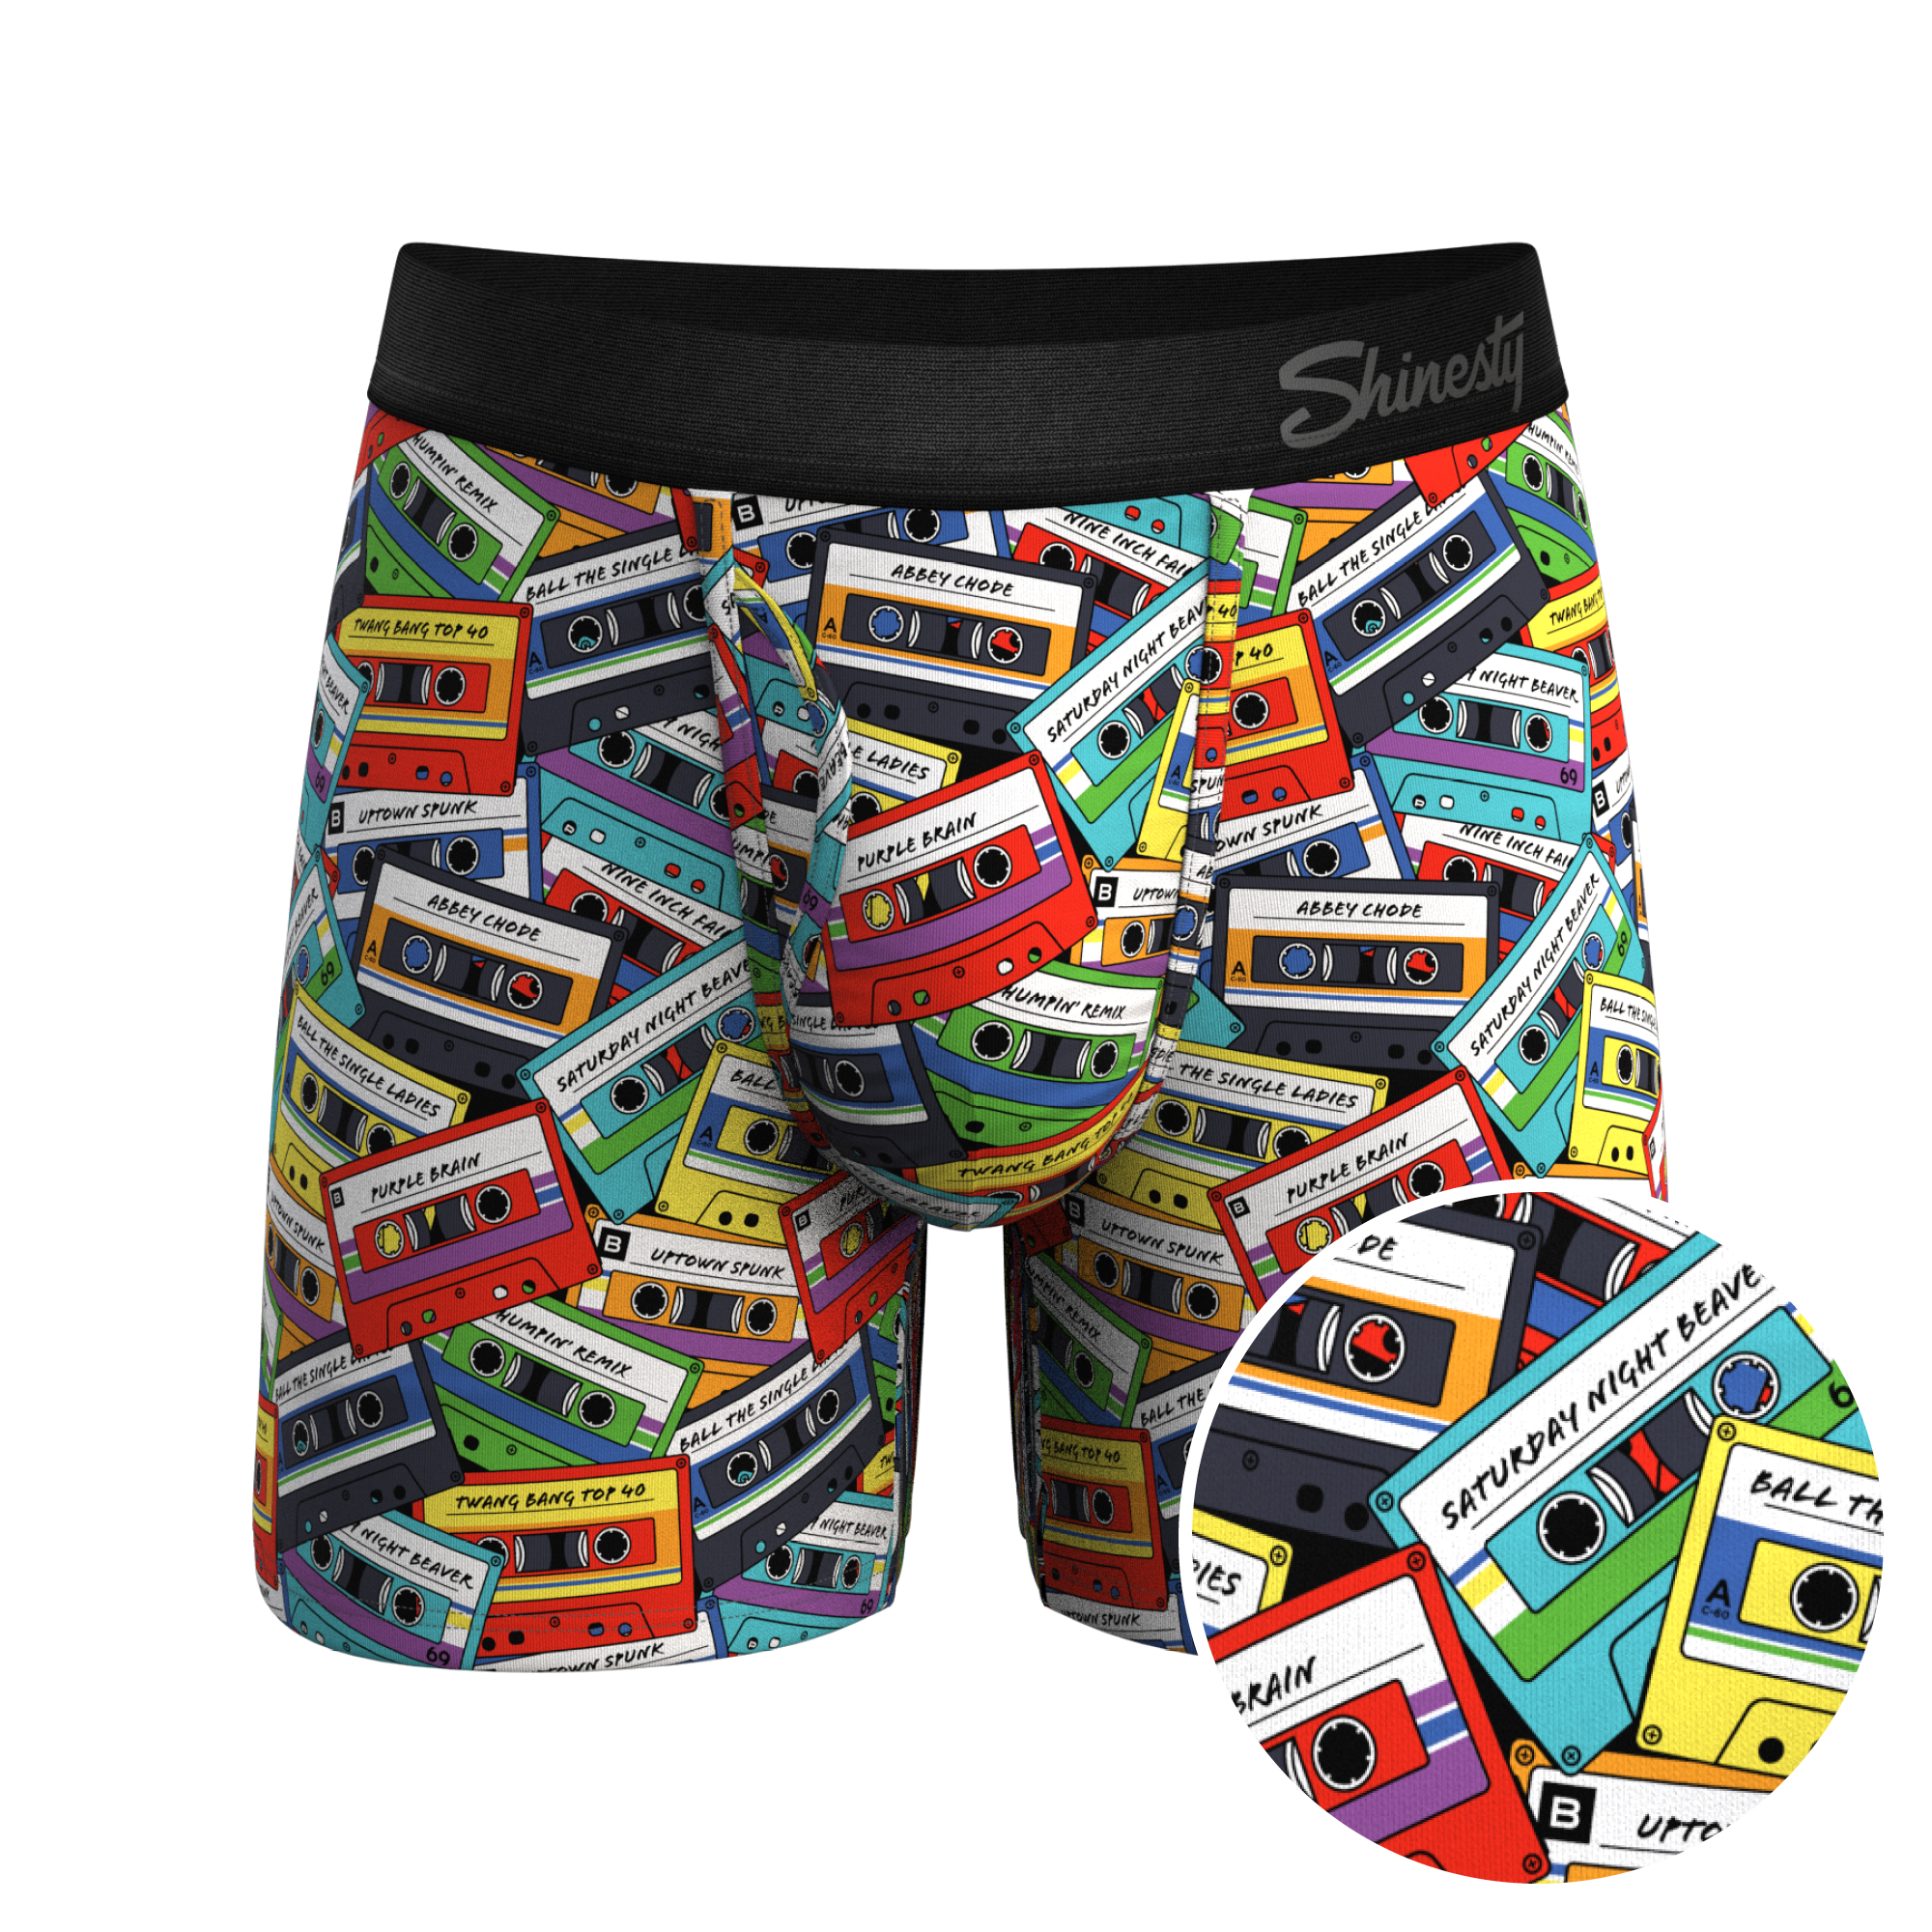 Cassette Tapes Ball Hammock® Pouch Underwear With Fly